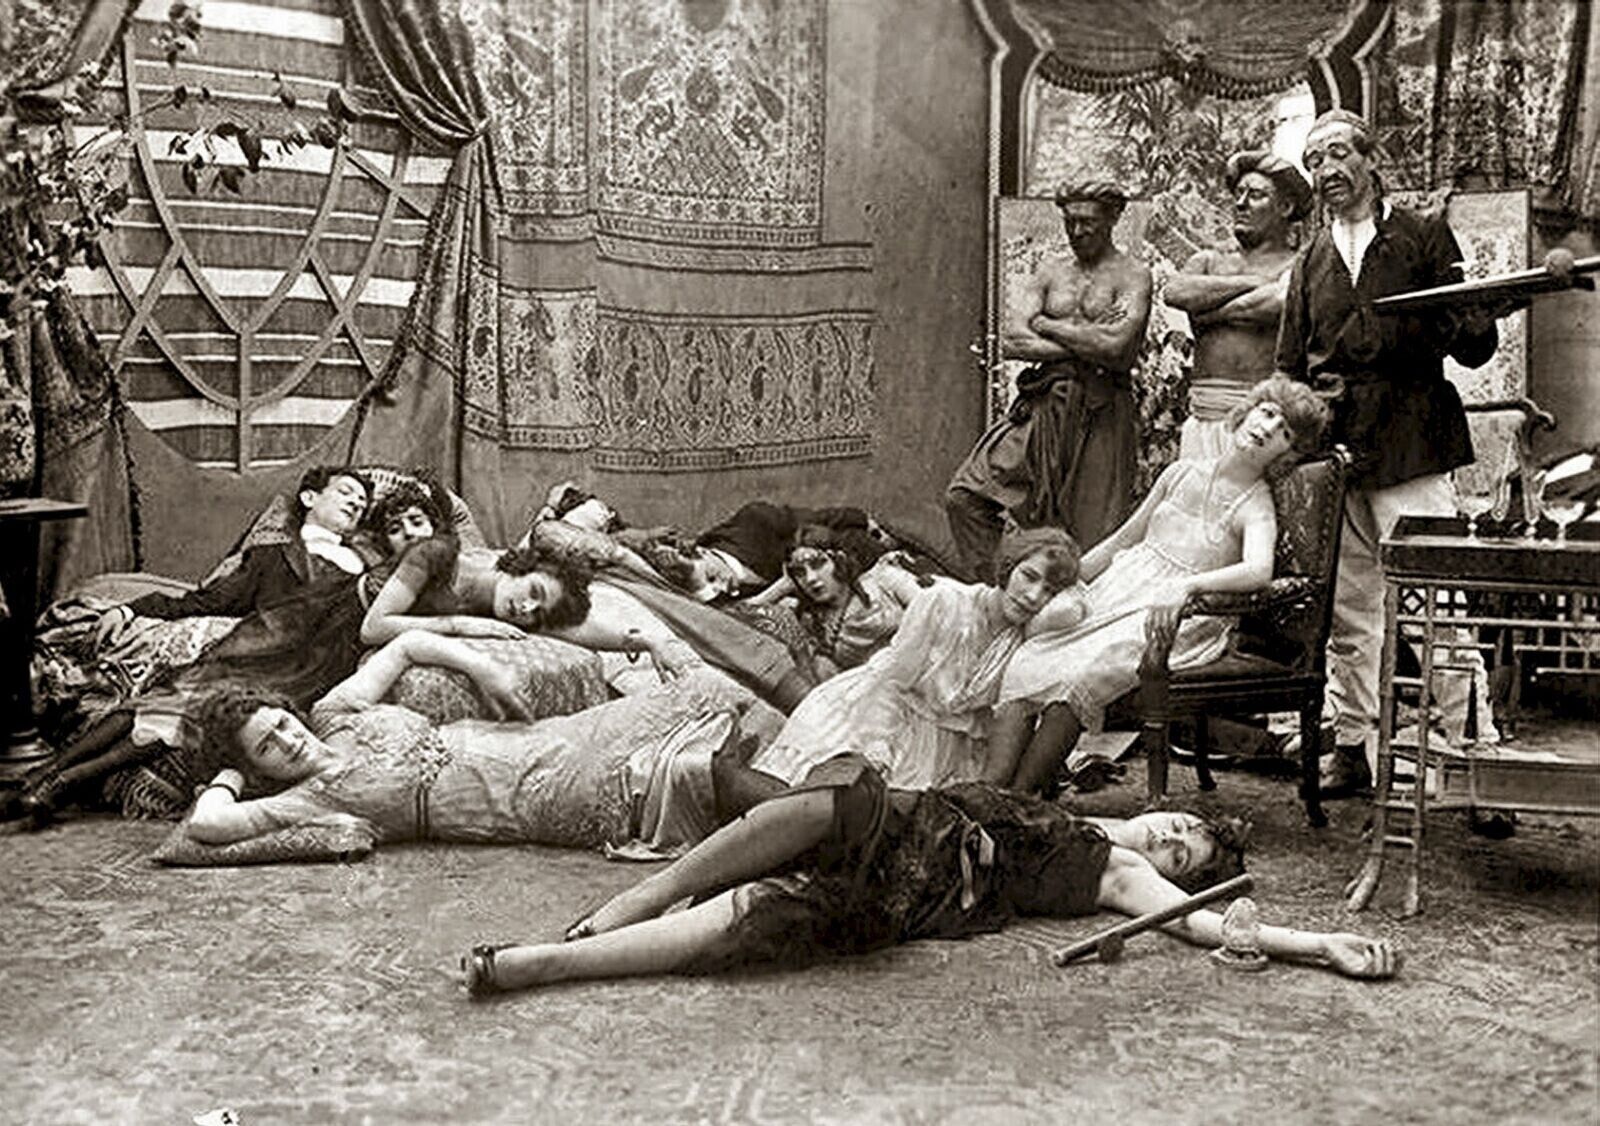 1918 FRENCH OPIUM Den Drug Party Classic Historic Poster Photo 13x19